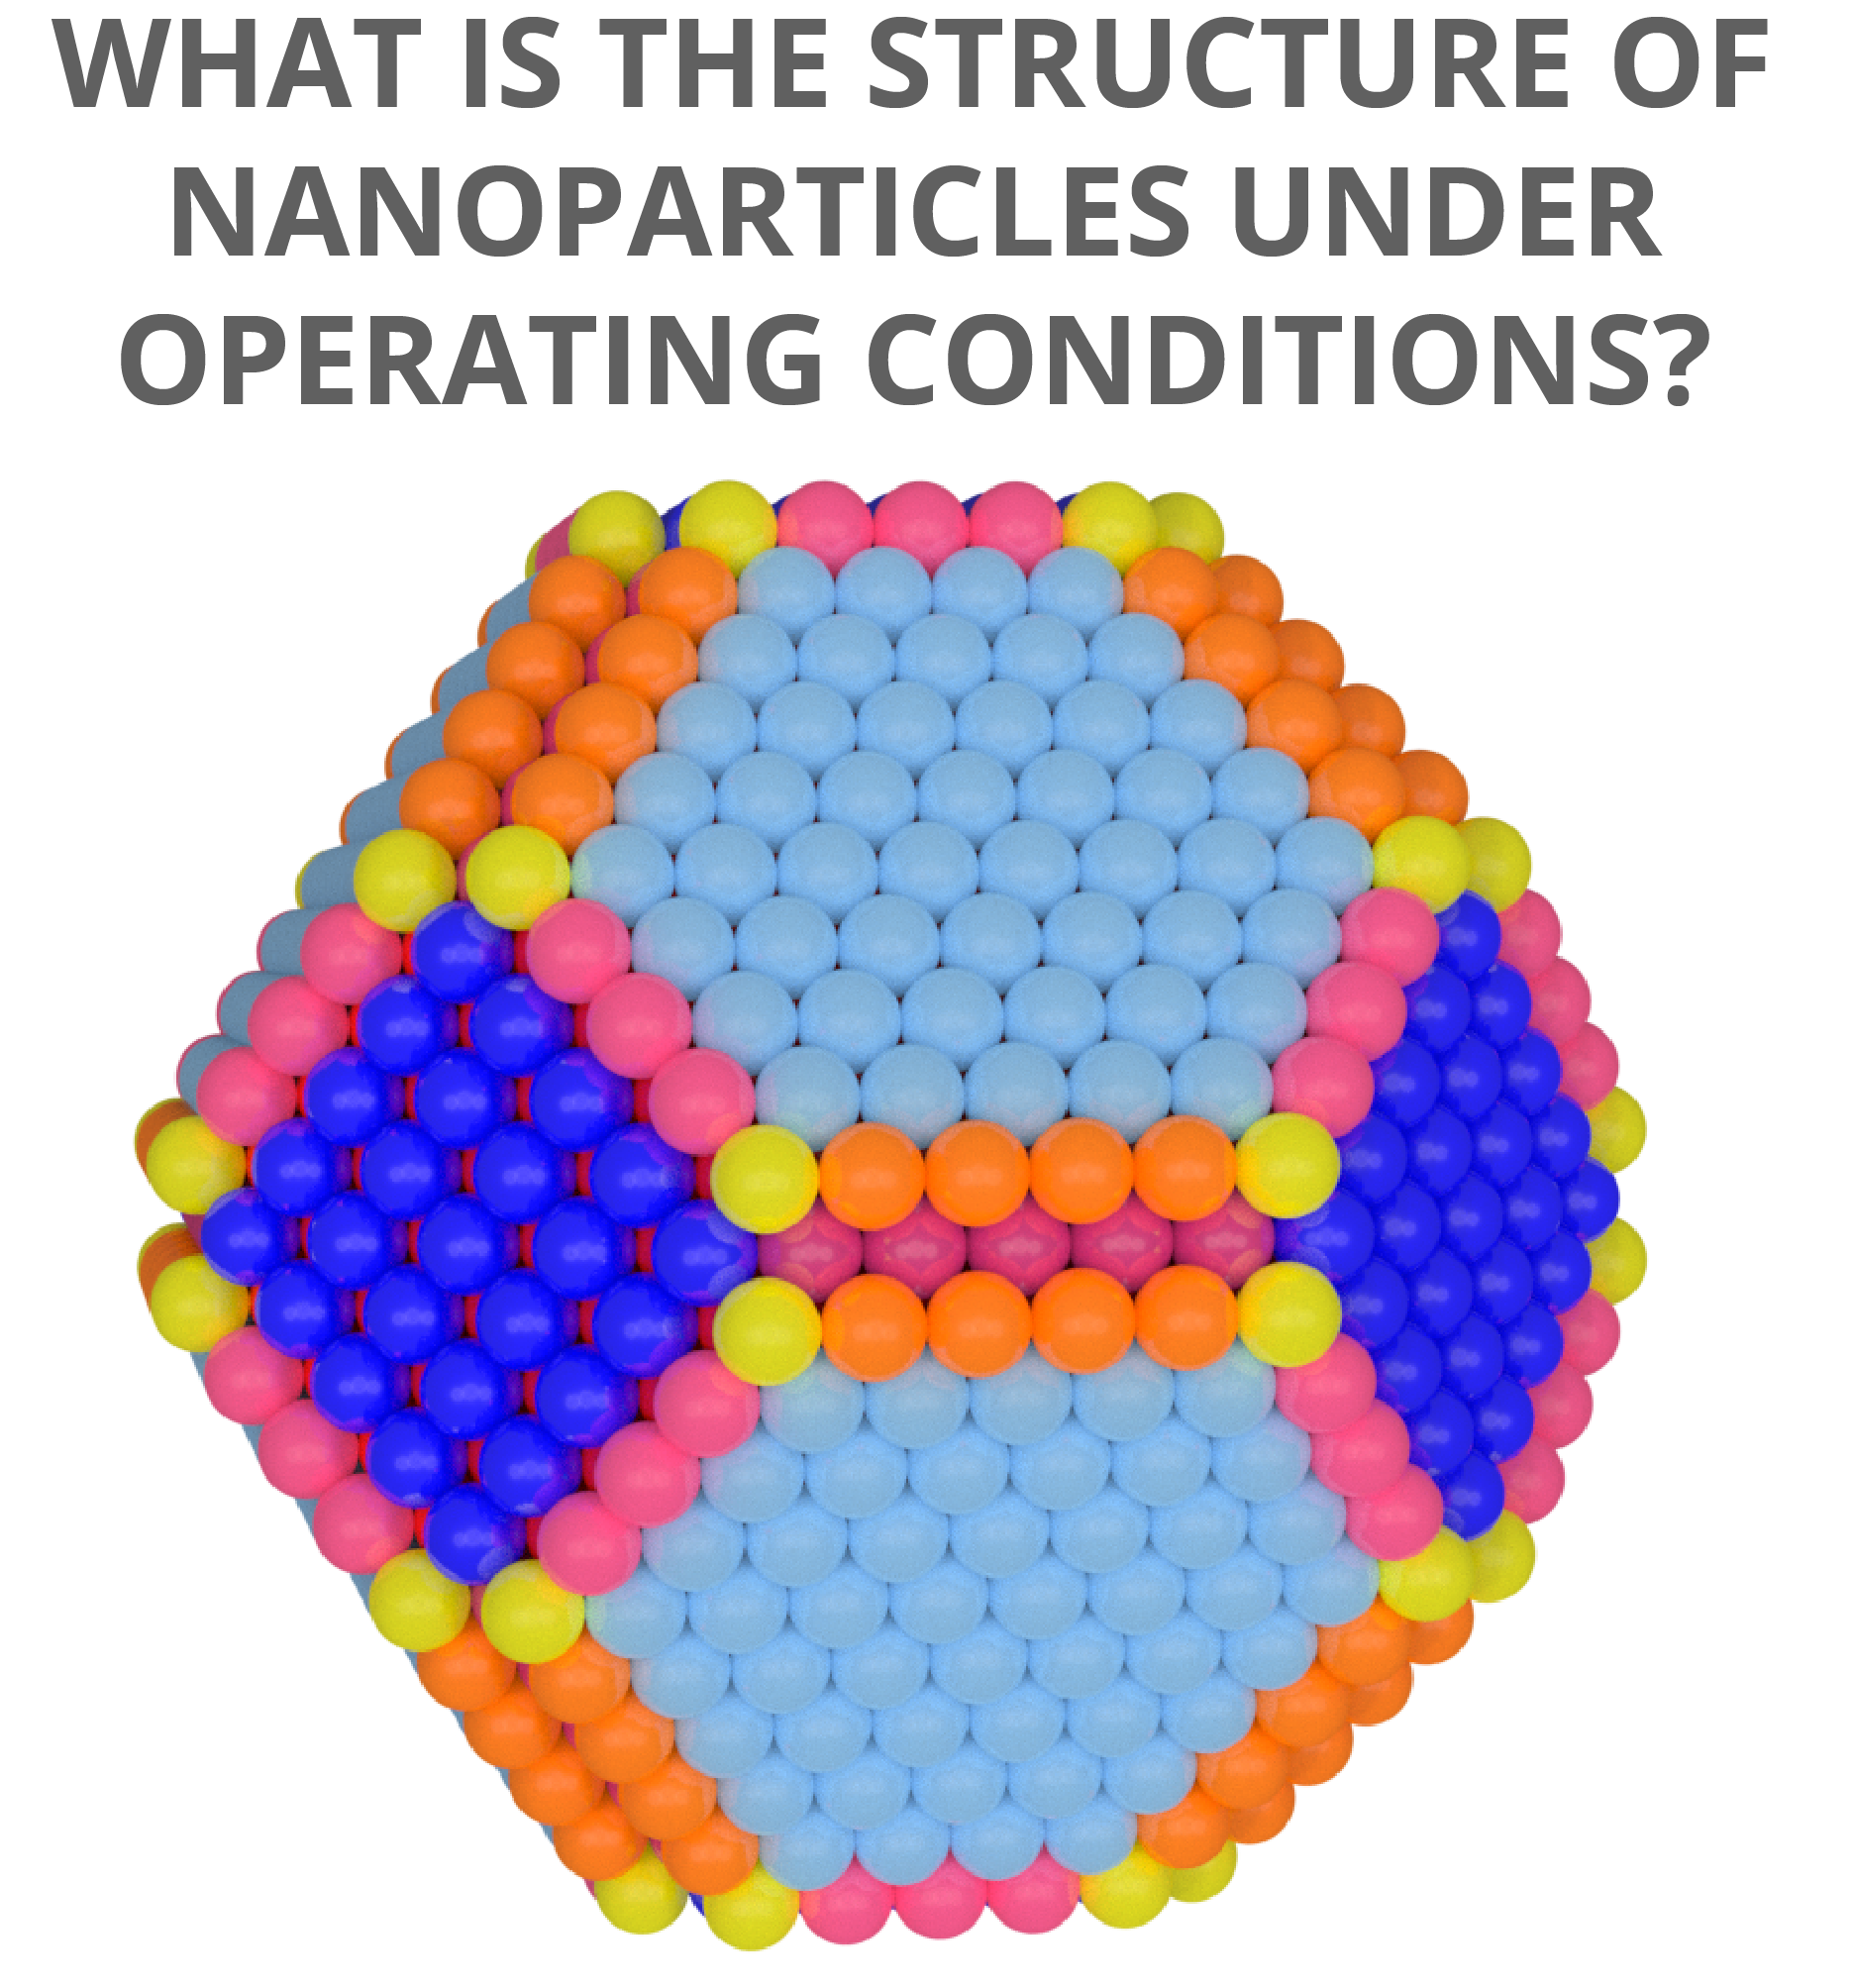 Structure of nanoparticles